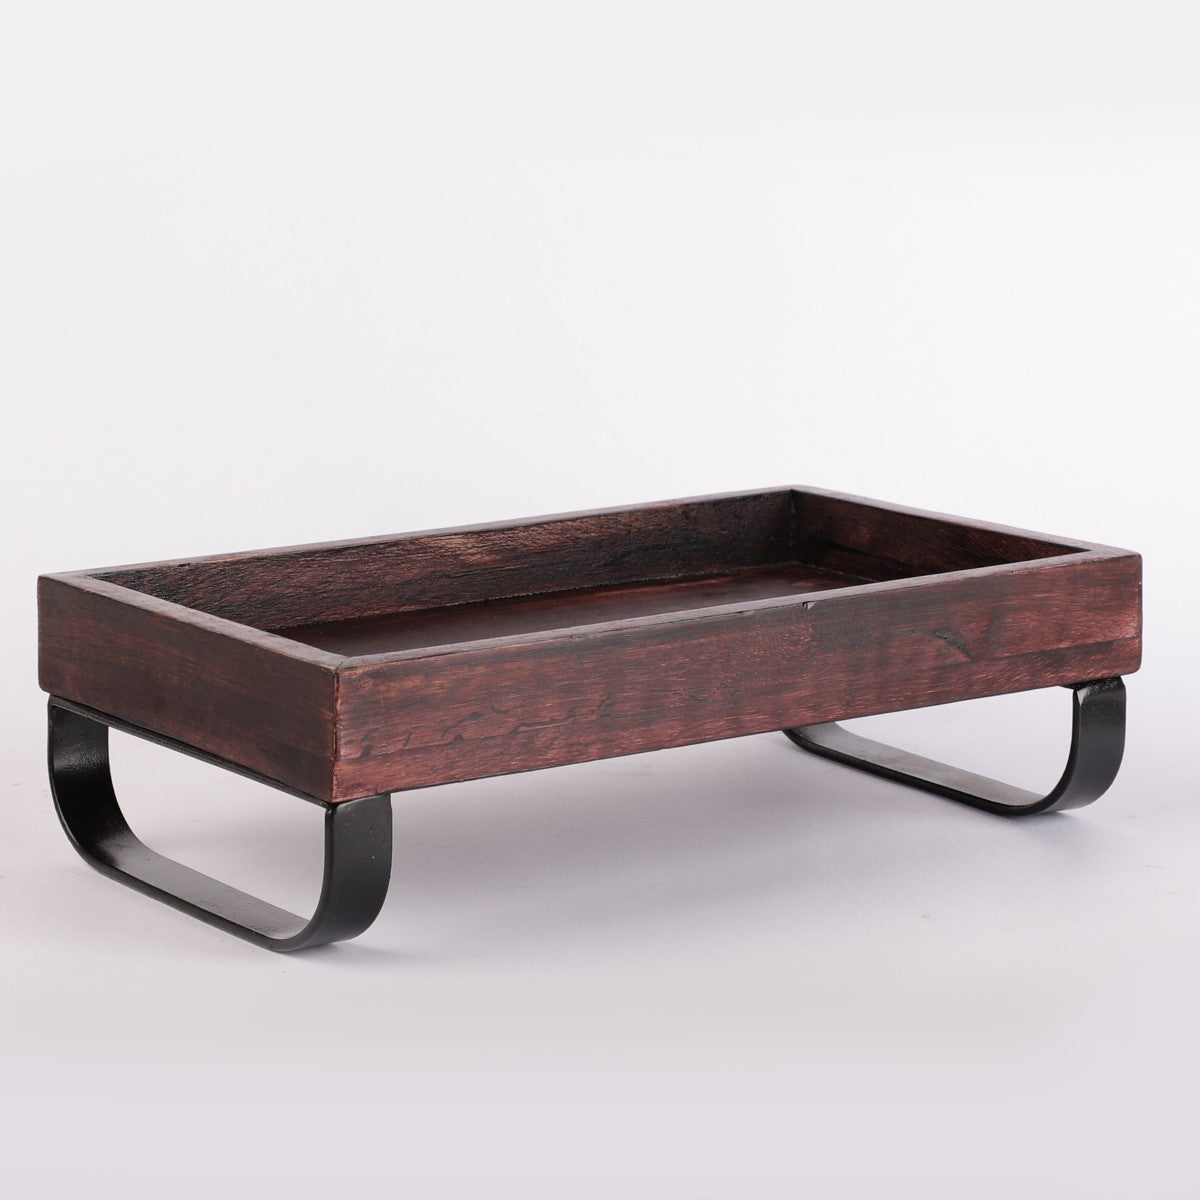 Raised Wooden Finished Serving Tray